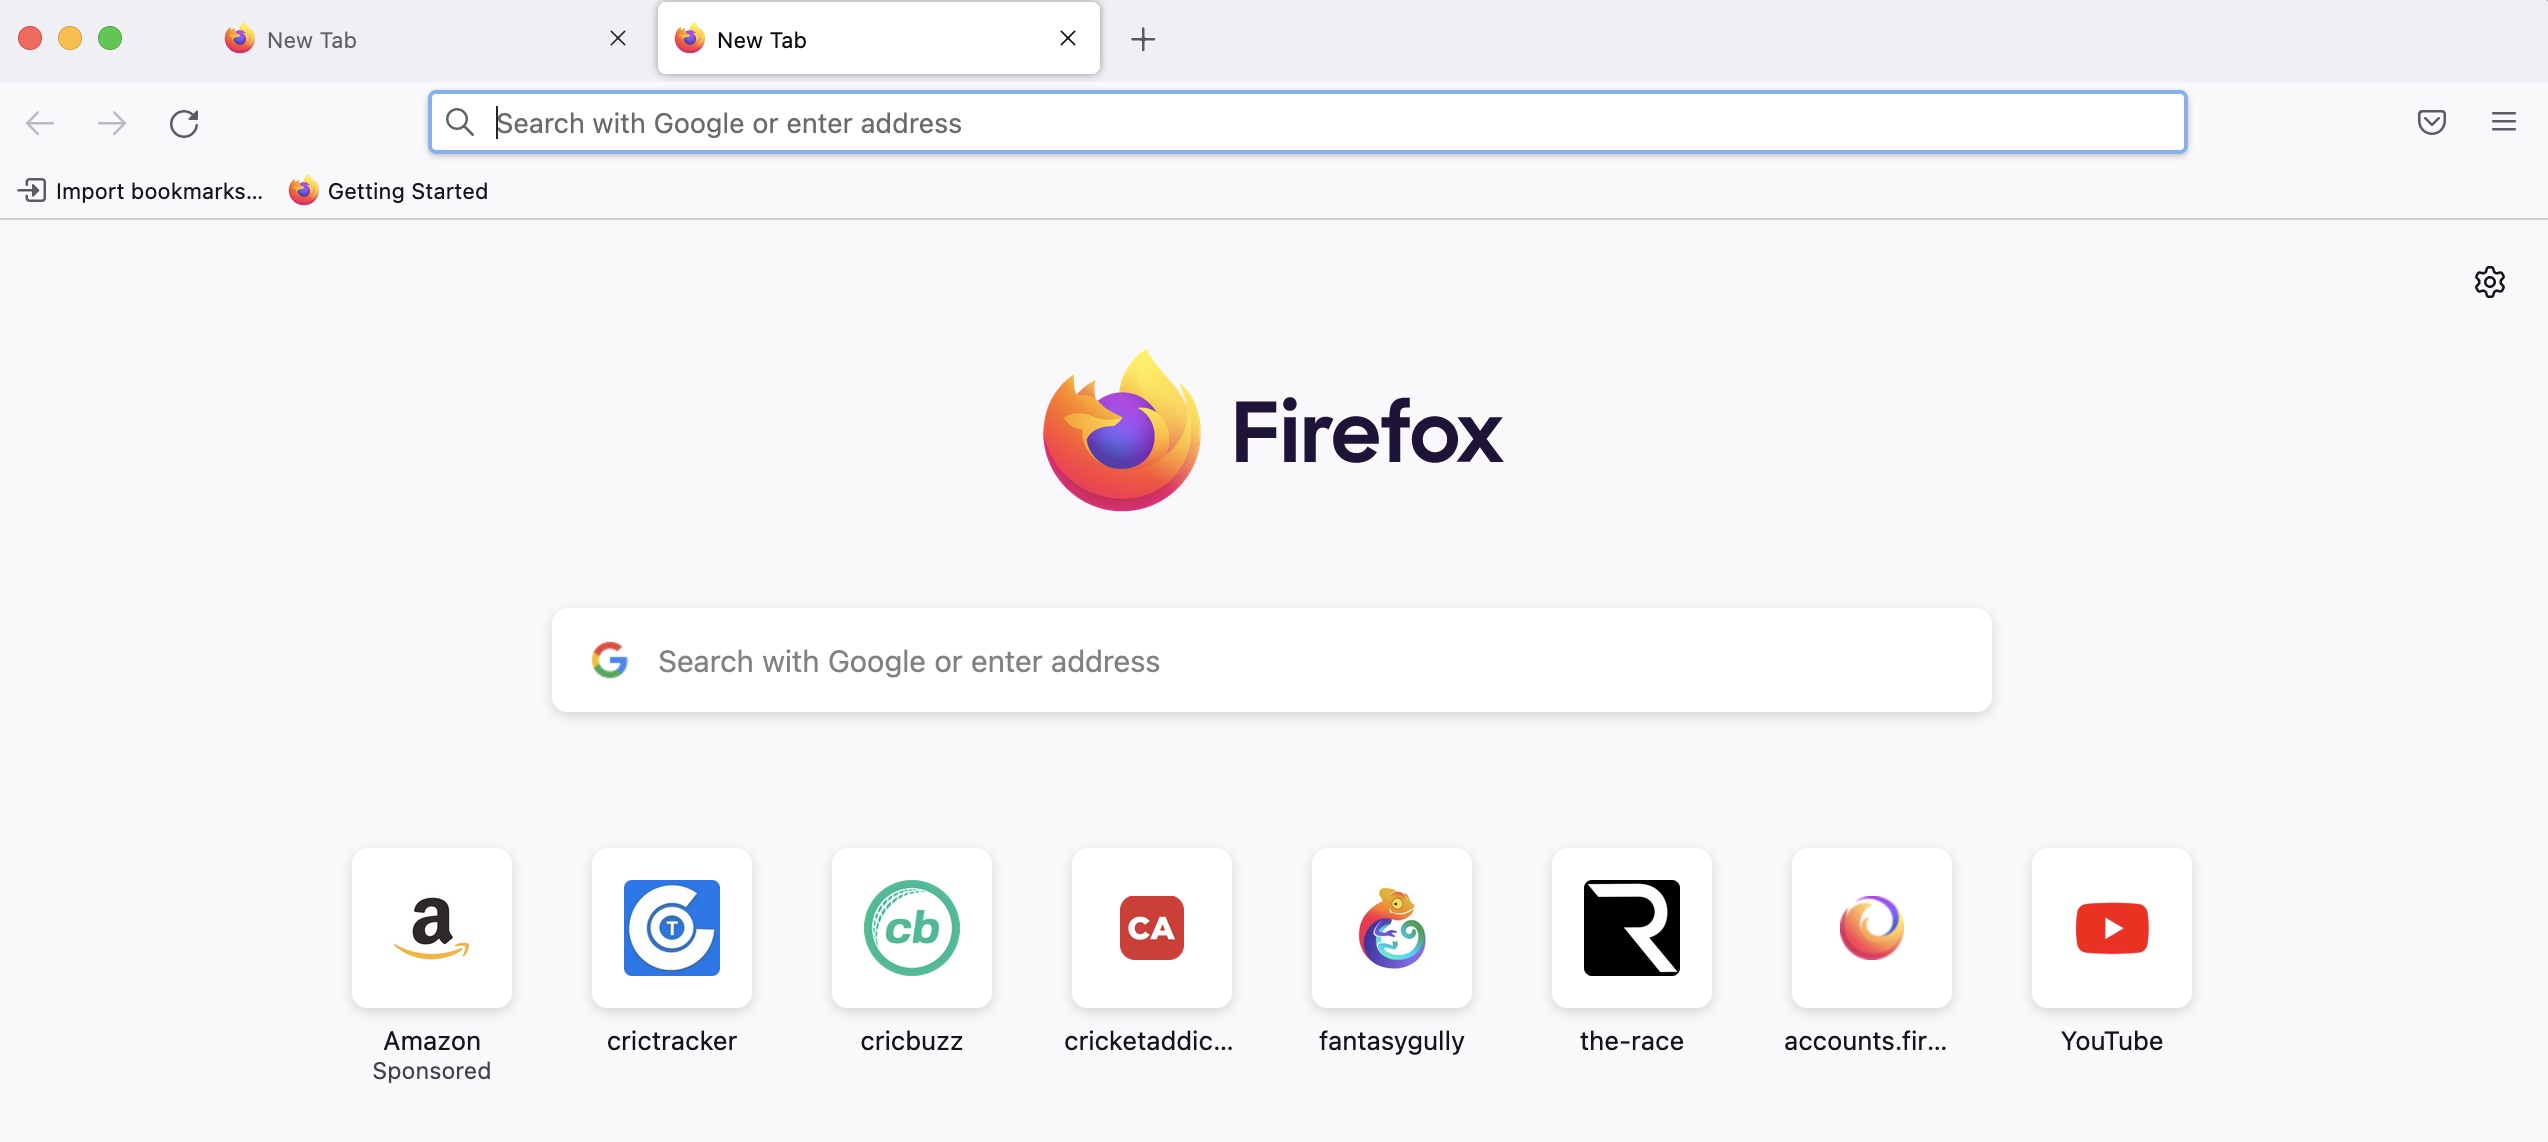 How to view the source code for a web page using the Firefox browser